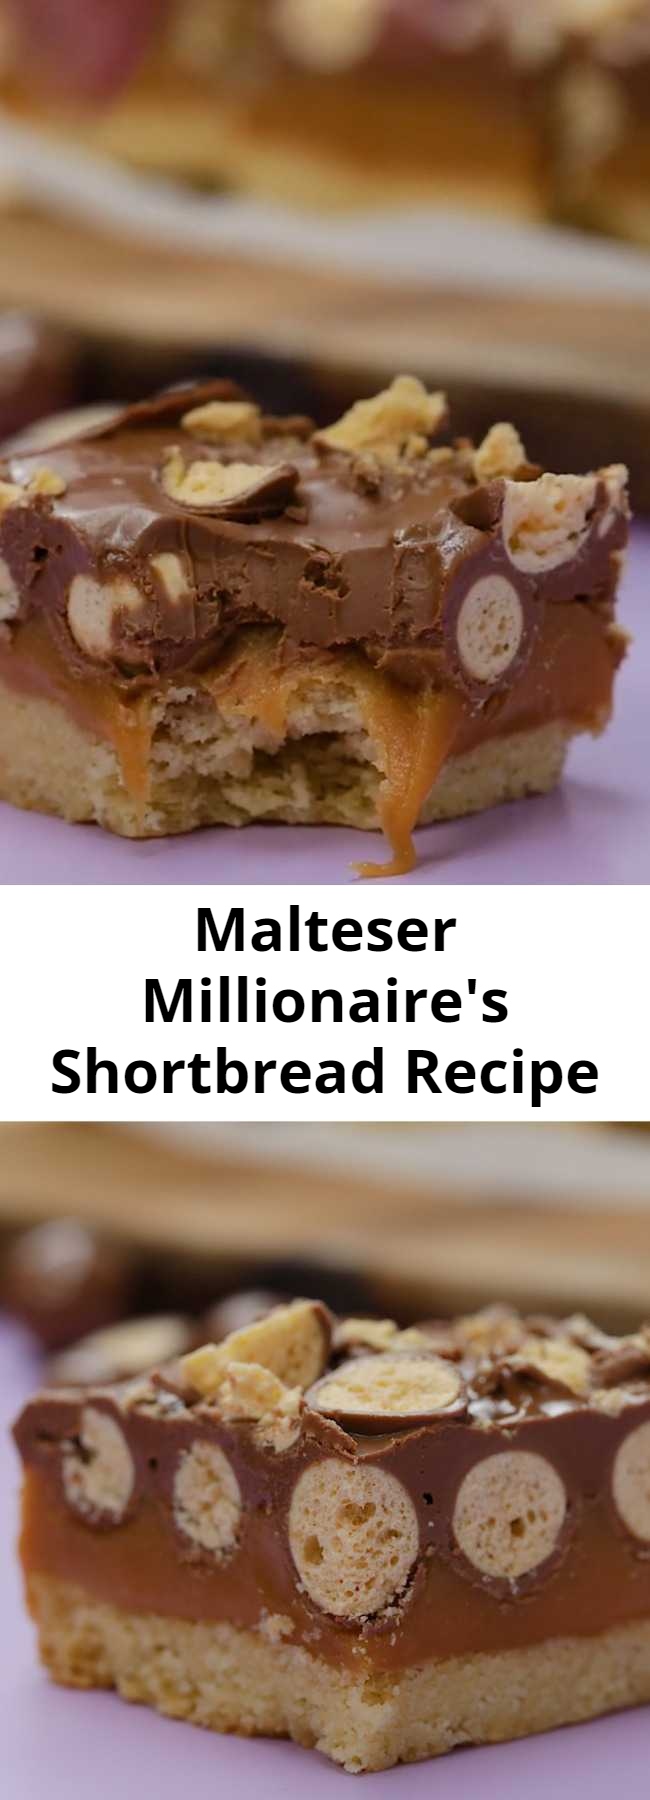 Easy Malteser Millionaire's Shortbread Recipe - To all the Malteser fan out there, this is a next level Malteser Millionaire Shortbread!